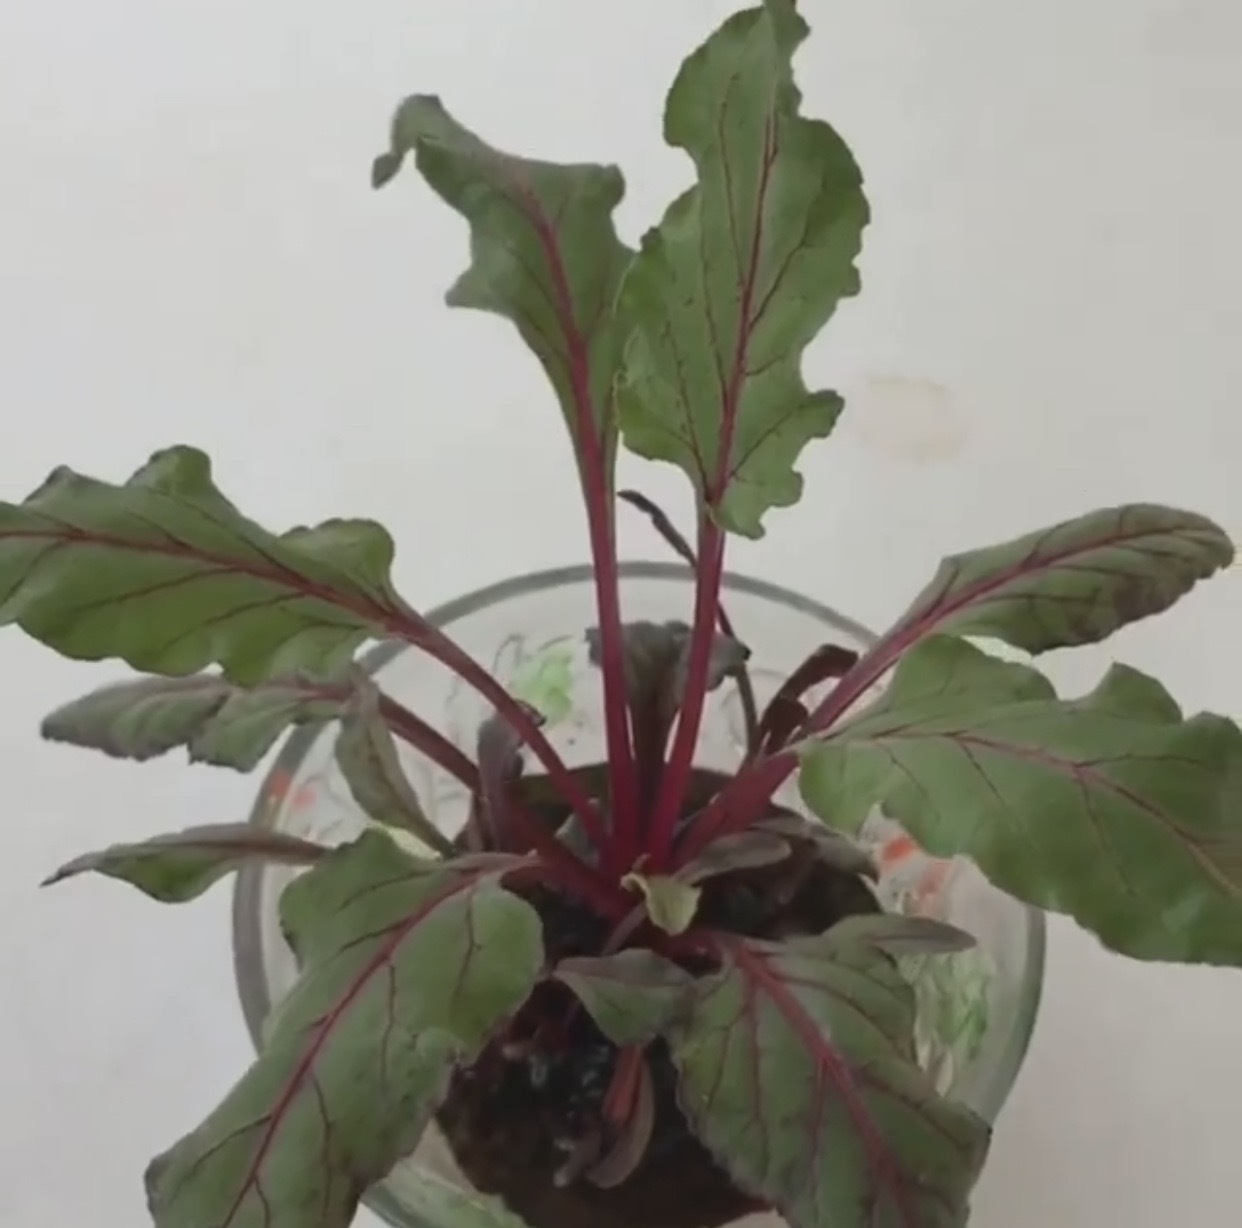 Beetroot greens for salads.